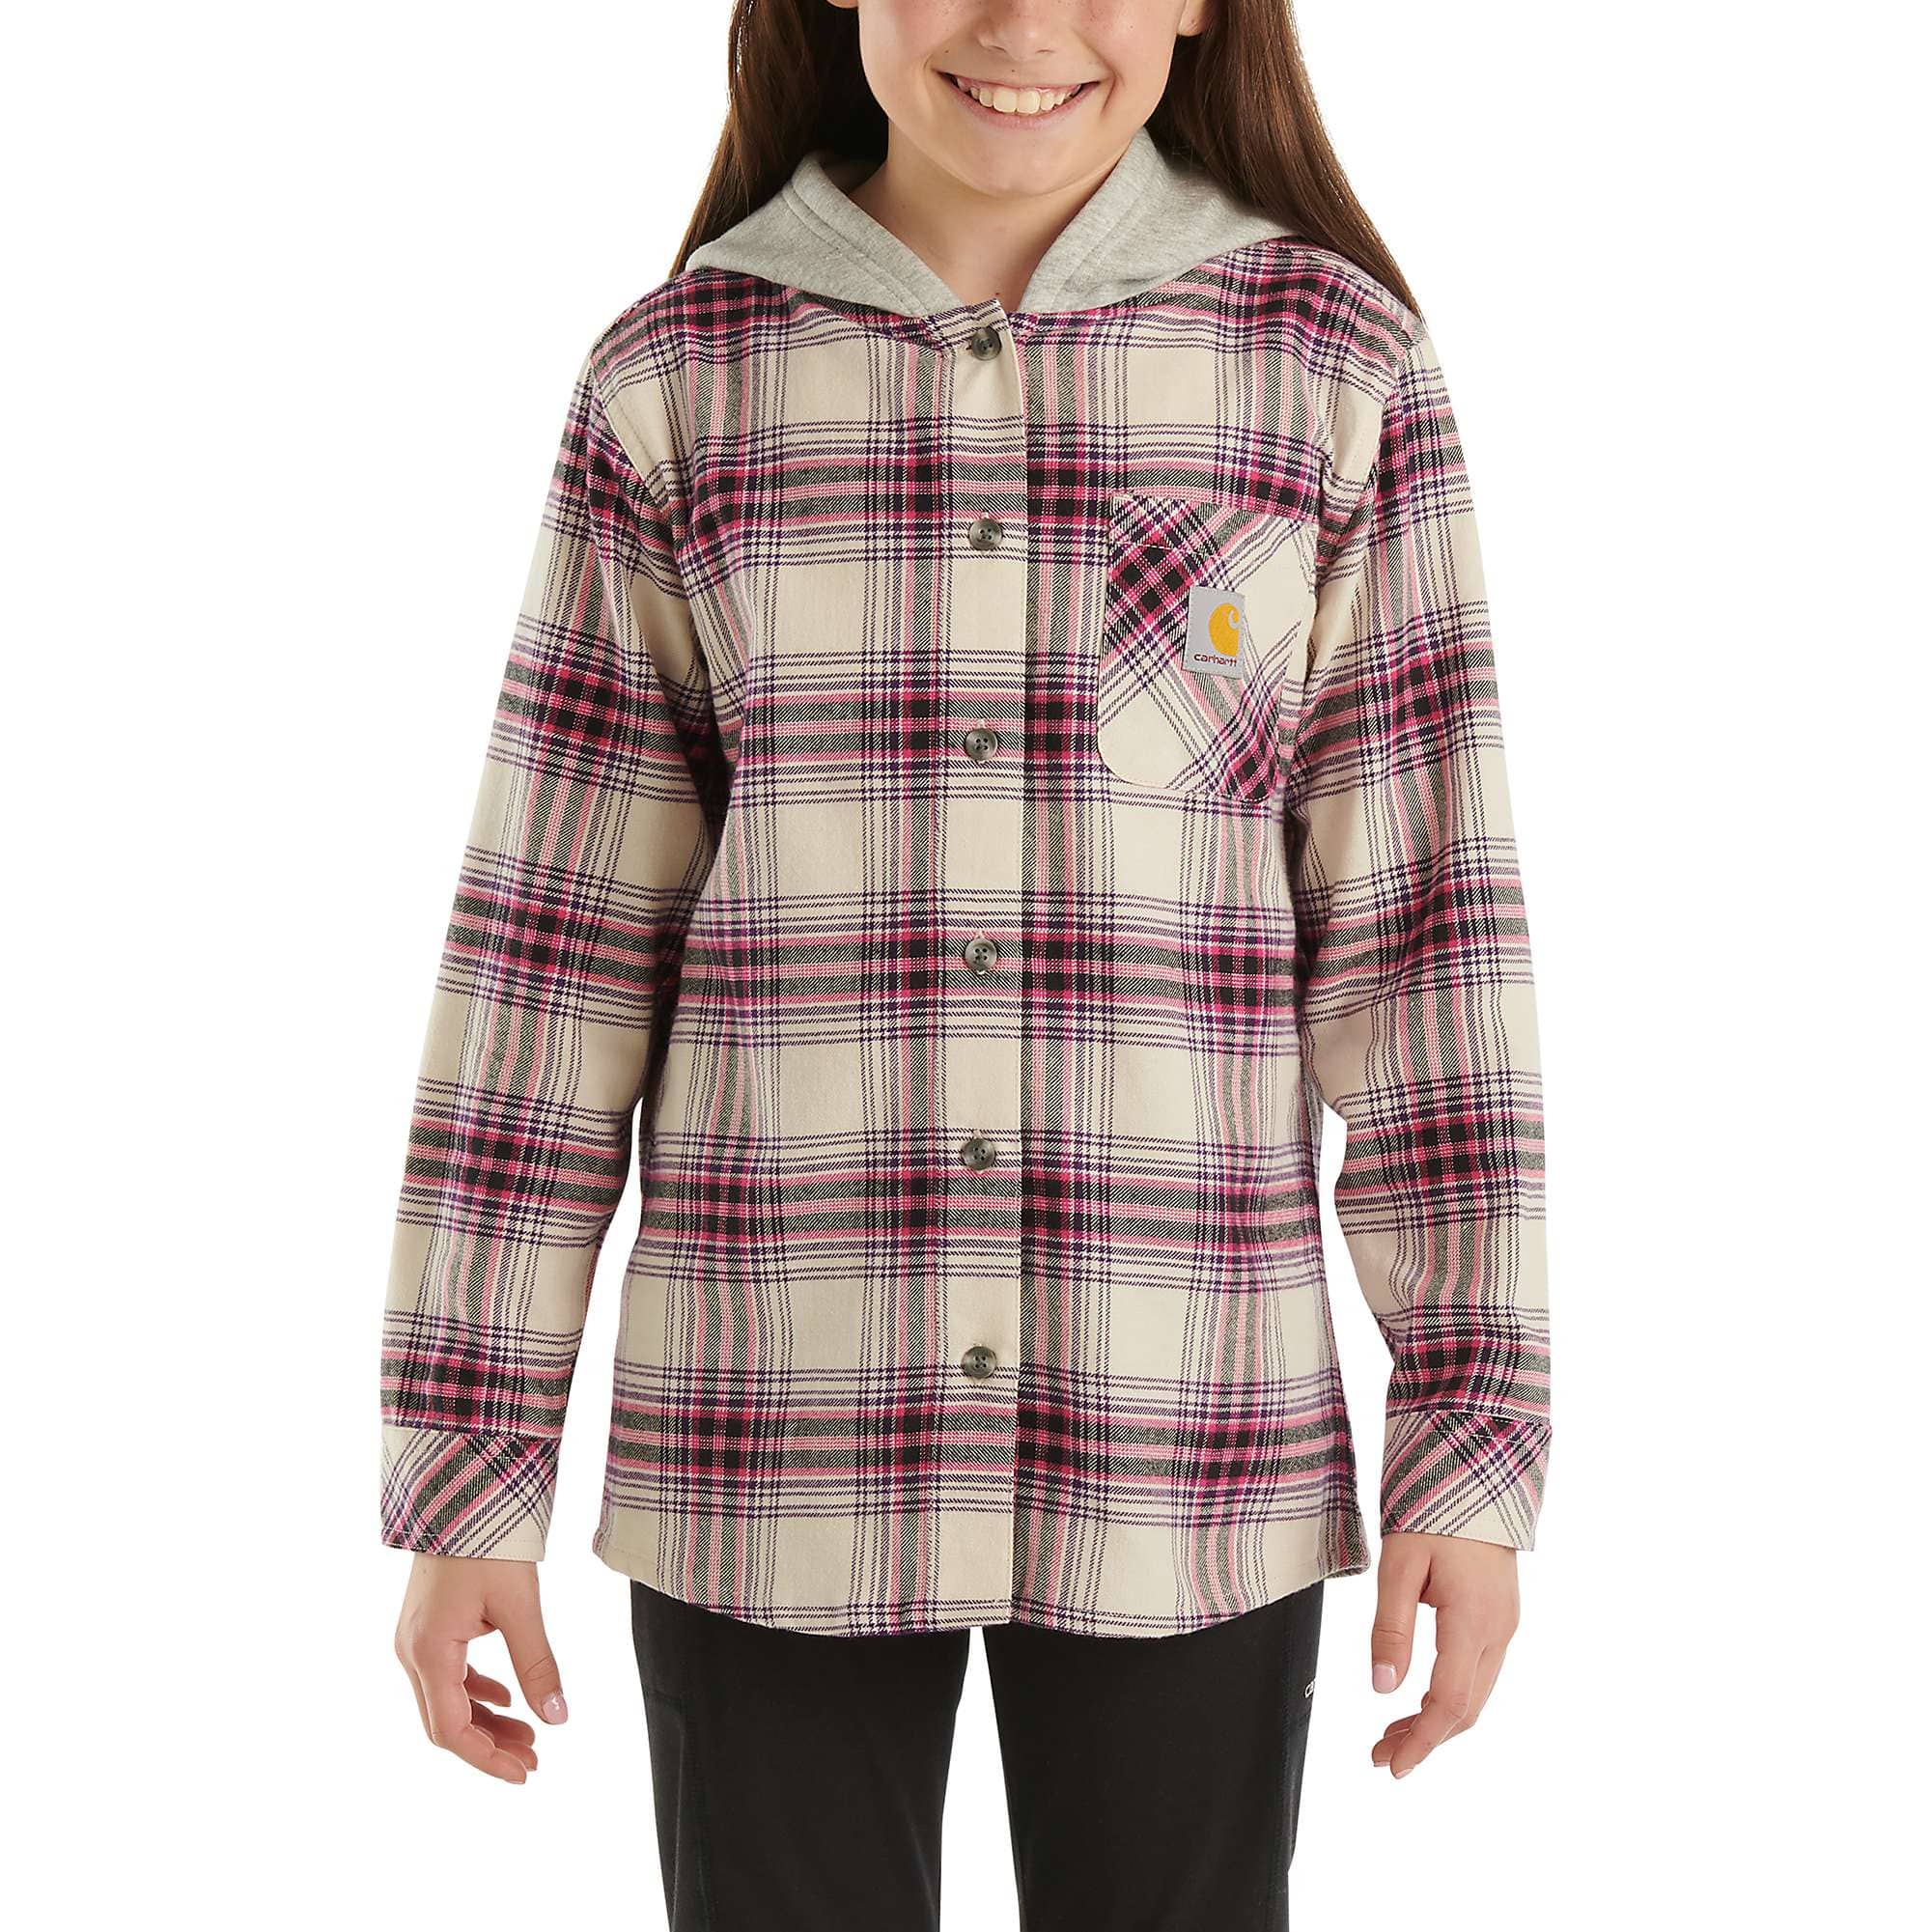 Girls' Long-Sleeve Pocket Flannel Shirt (Child/Youth)